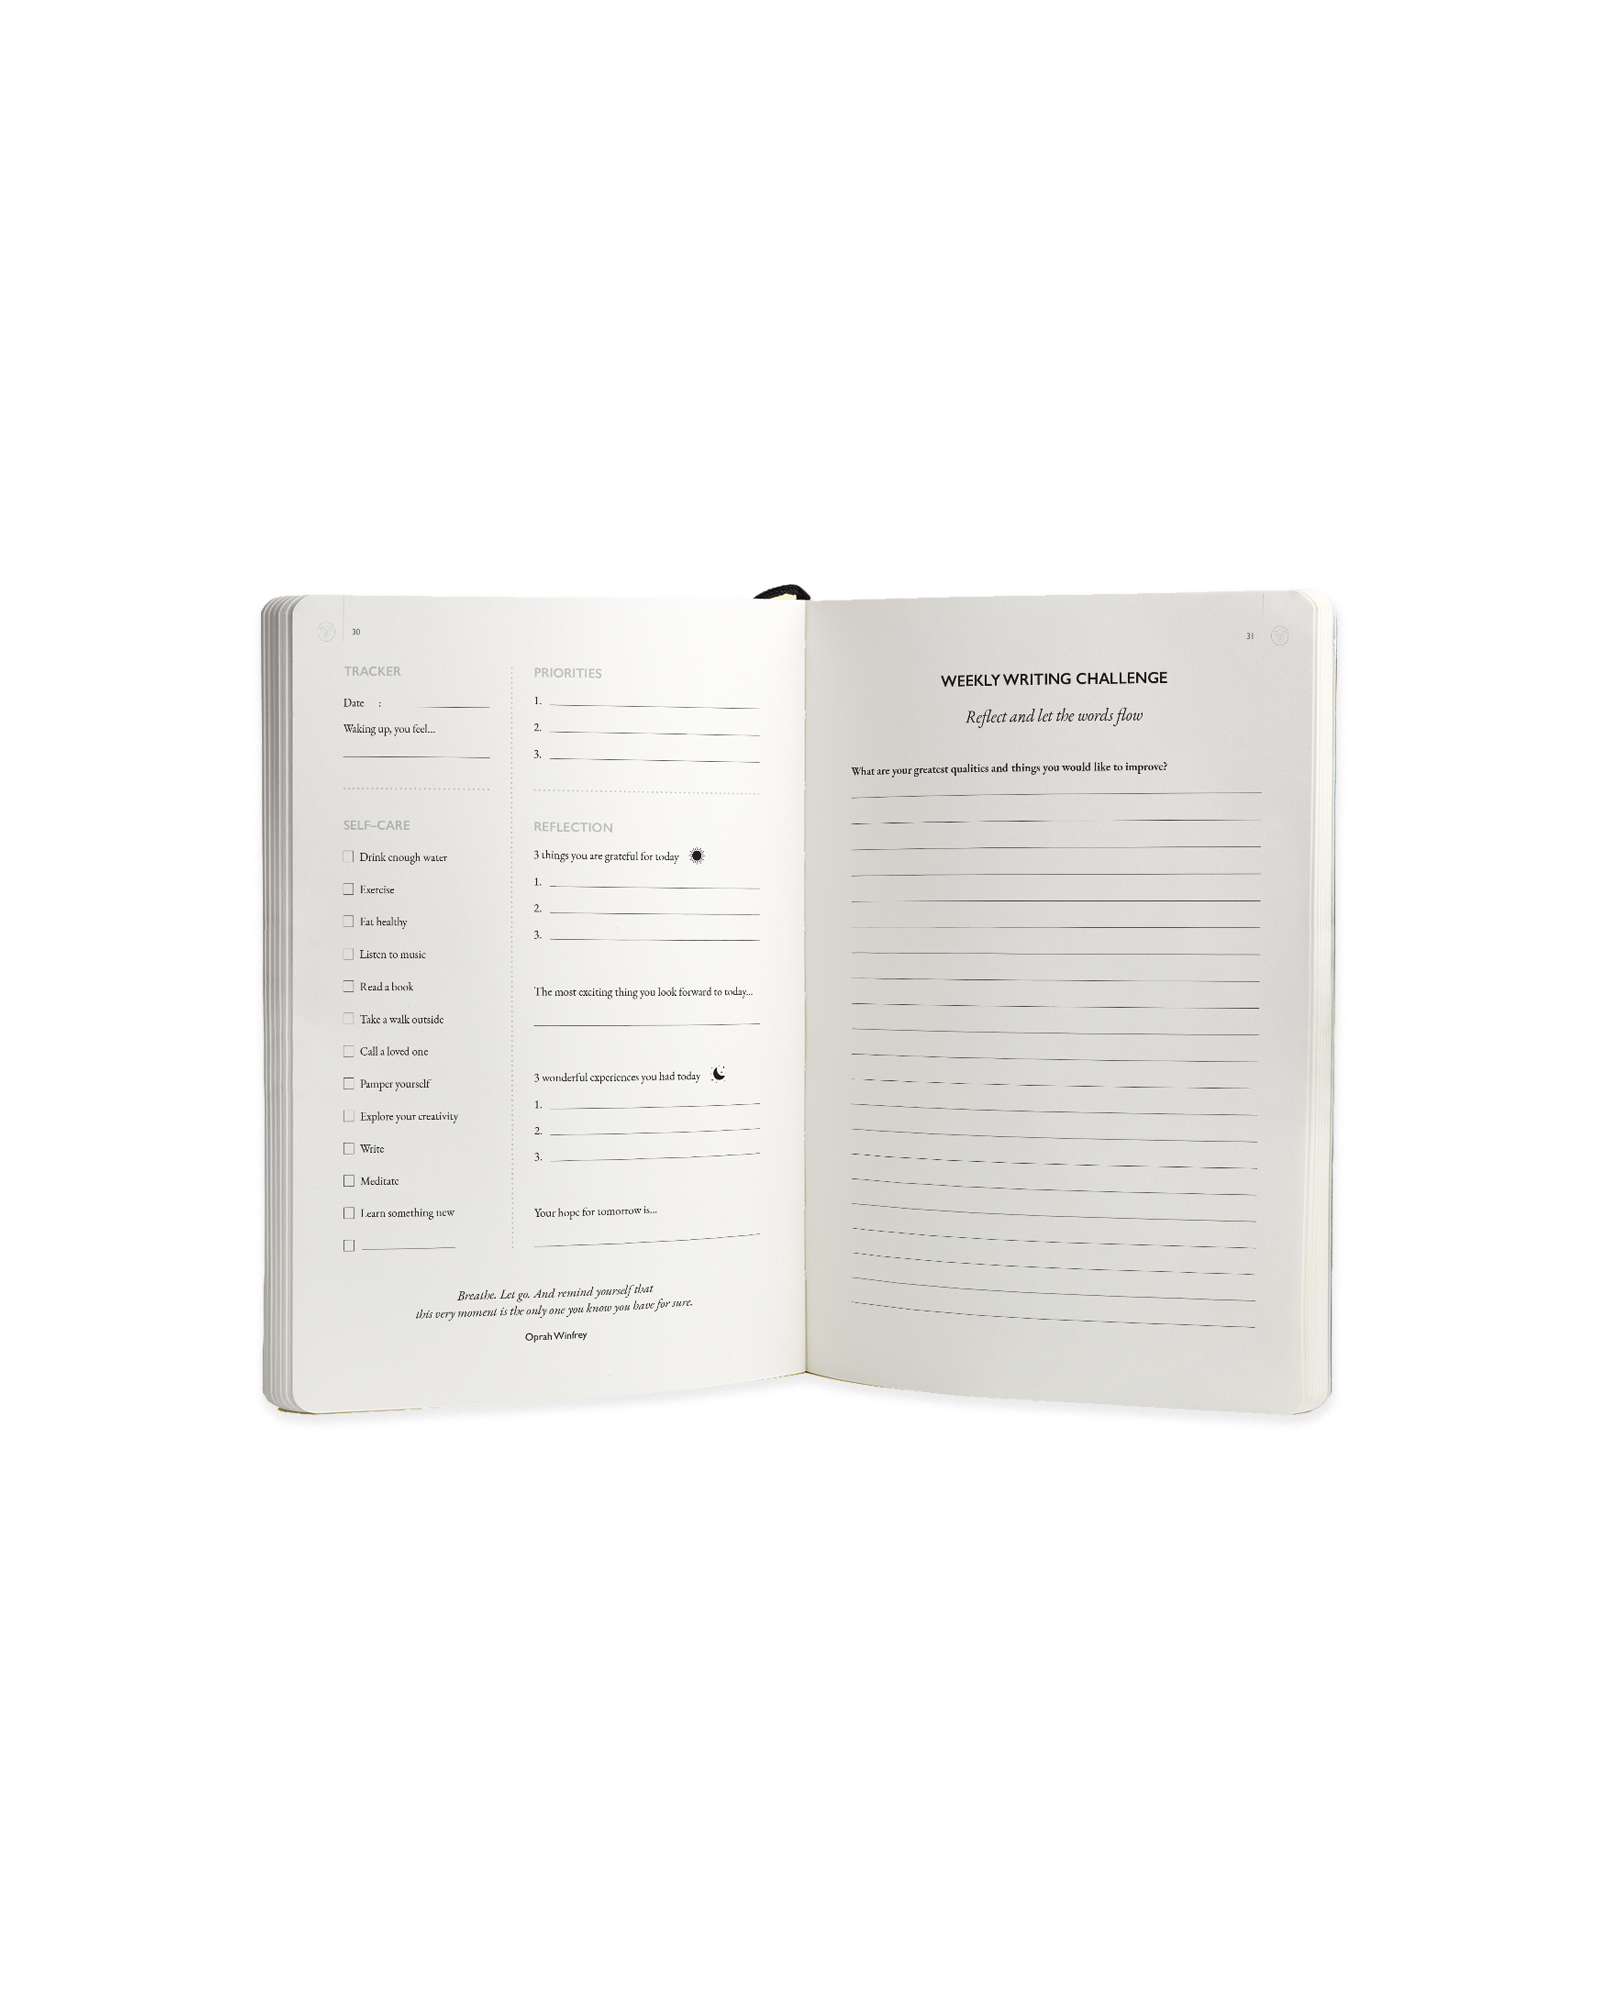 THE SELF-REFLECTION JOURNAL IN BEIGE